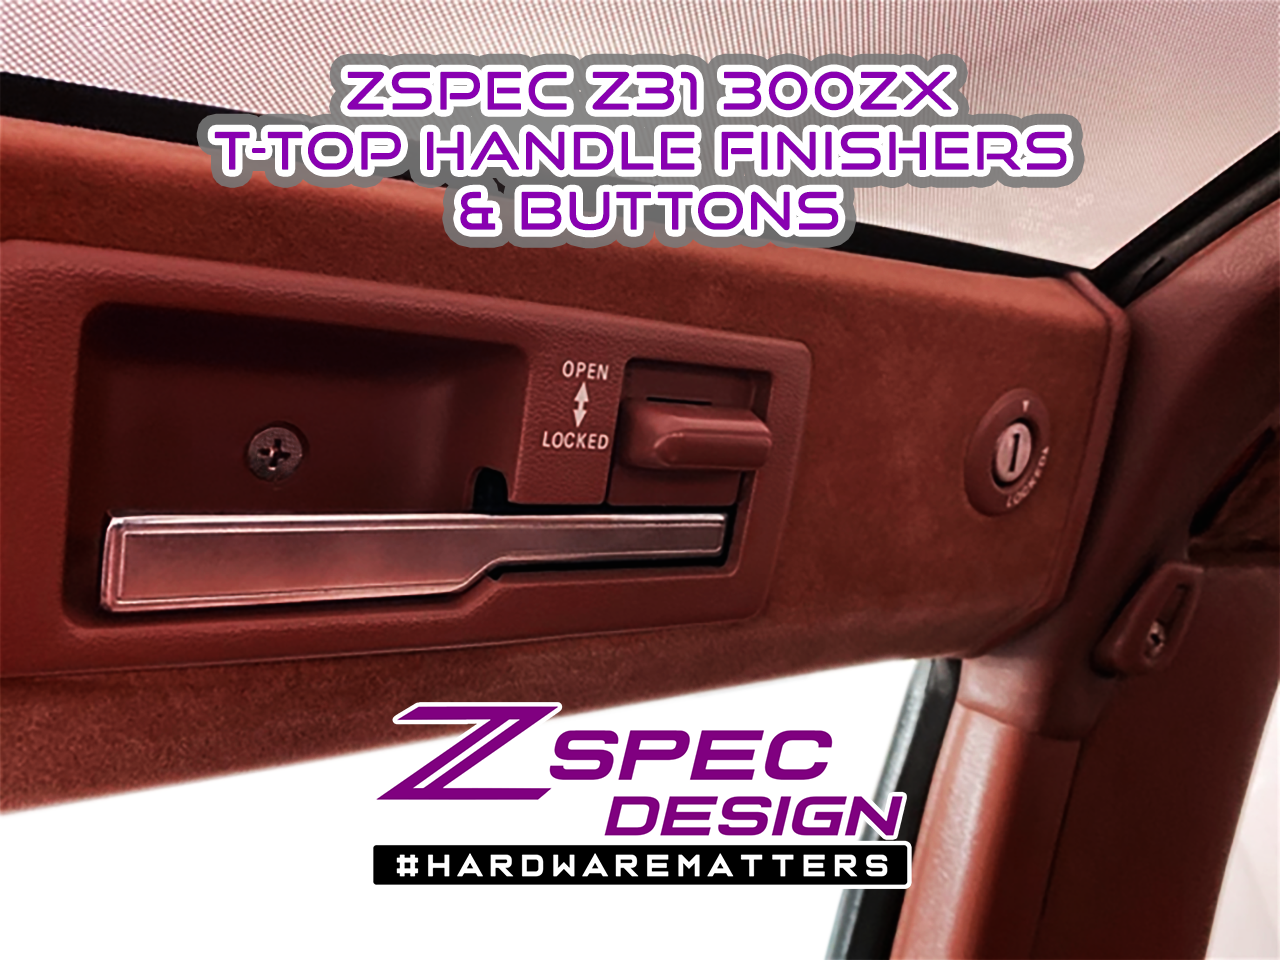 ZSPEC T-Top Handle Finisher Sets, 90-96 Nissan 300zx Z32 LOCKING TOPS  Charcoal, Red, Blue and Tan OE-Matched Colors  Keywords Tops Handle Bezel Finishers Interior Plastics Handle